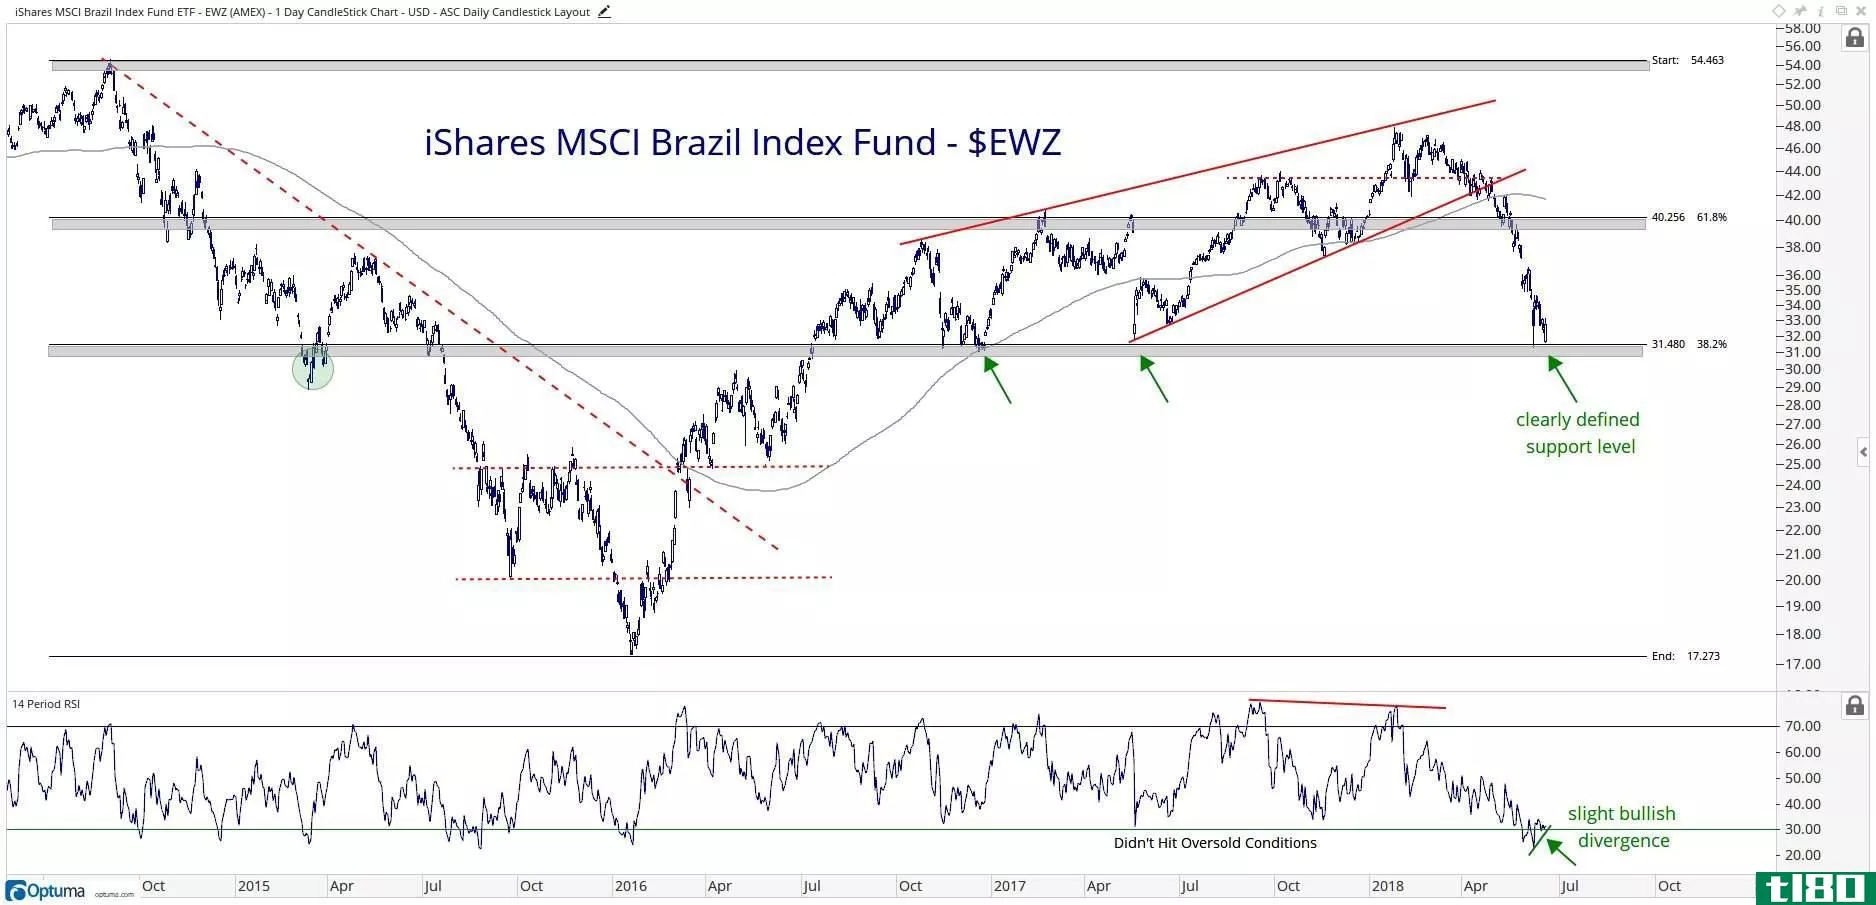 Technical chart showing the performance of the iShares MSCI Brazil Index Fund ETF (EWZ)